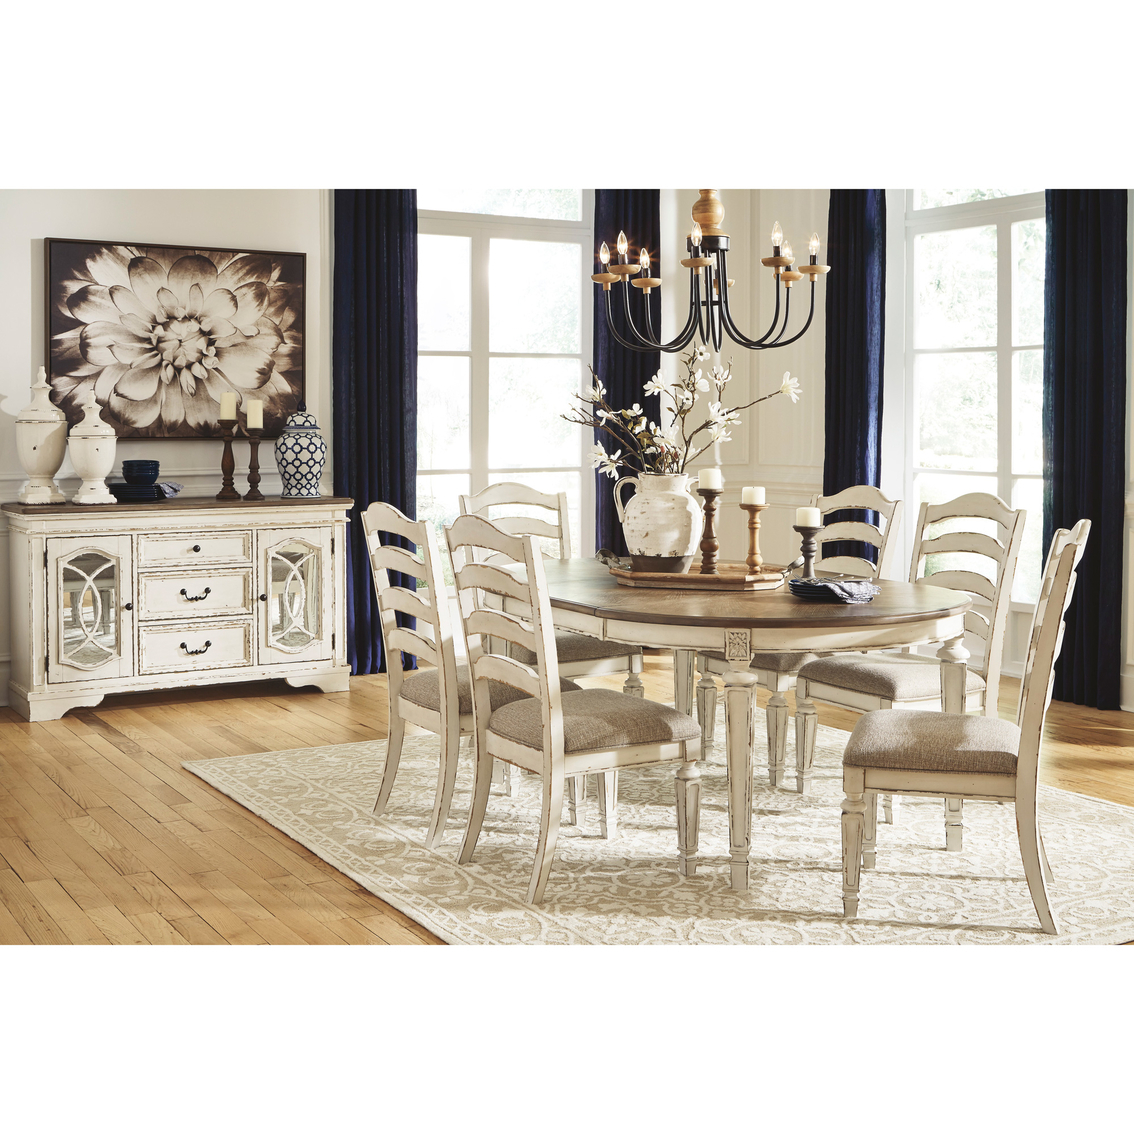 Realyn Oval Dining Room 7pc Set Table W6 Ladder Back Chairs within dimensions 1134 X 1134